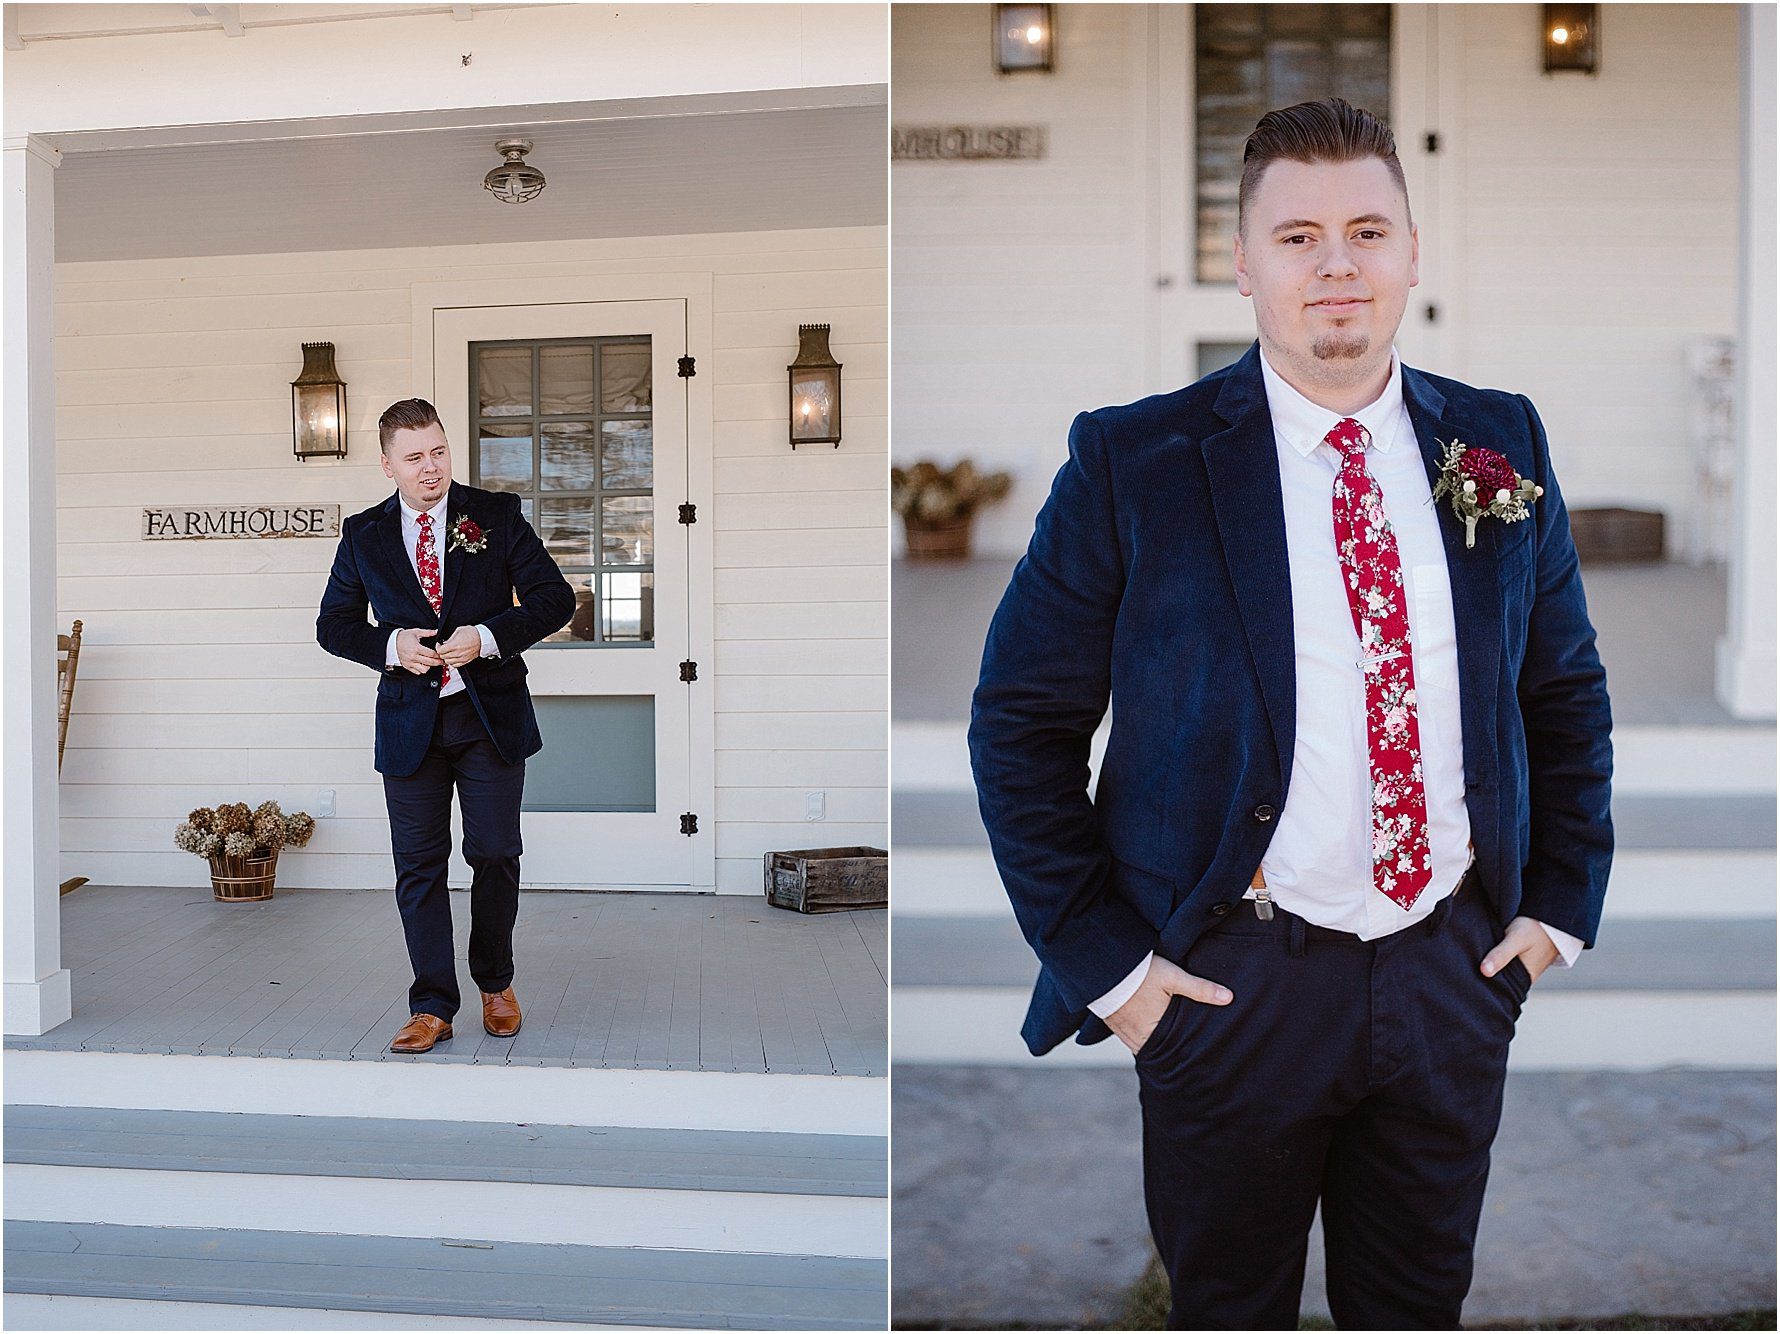 Groom Photos on a wedding day | Erin Morrison Photography www.erinmorrisonphotography.com